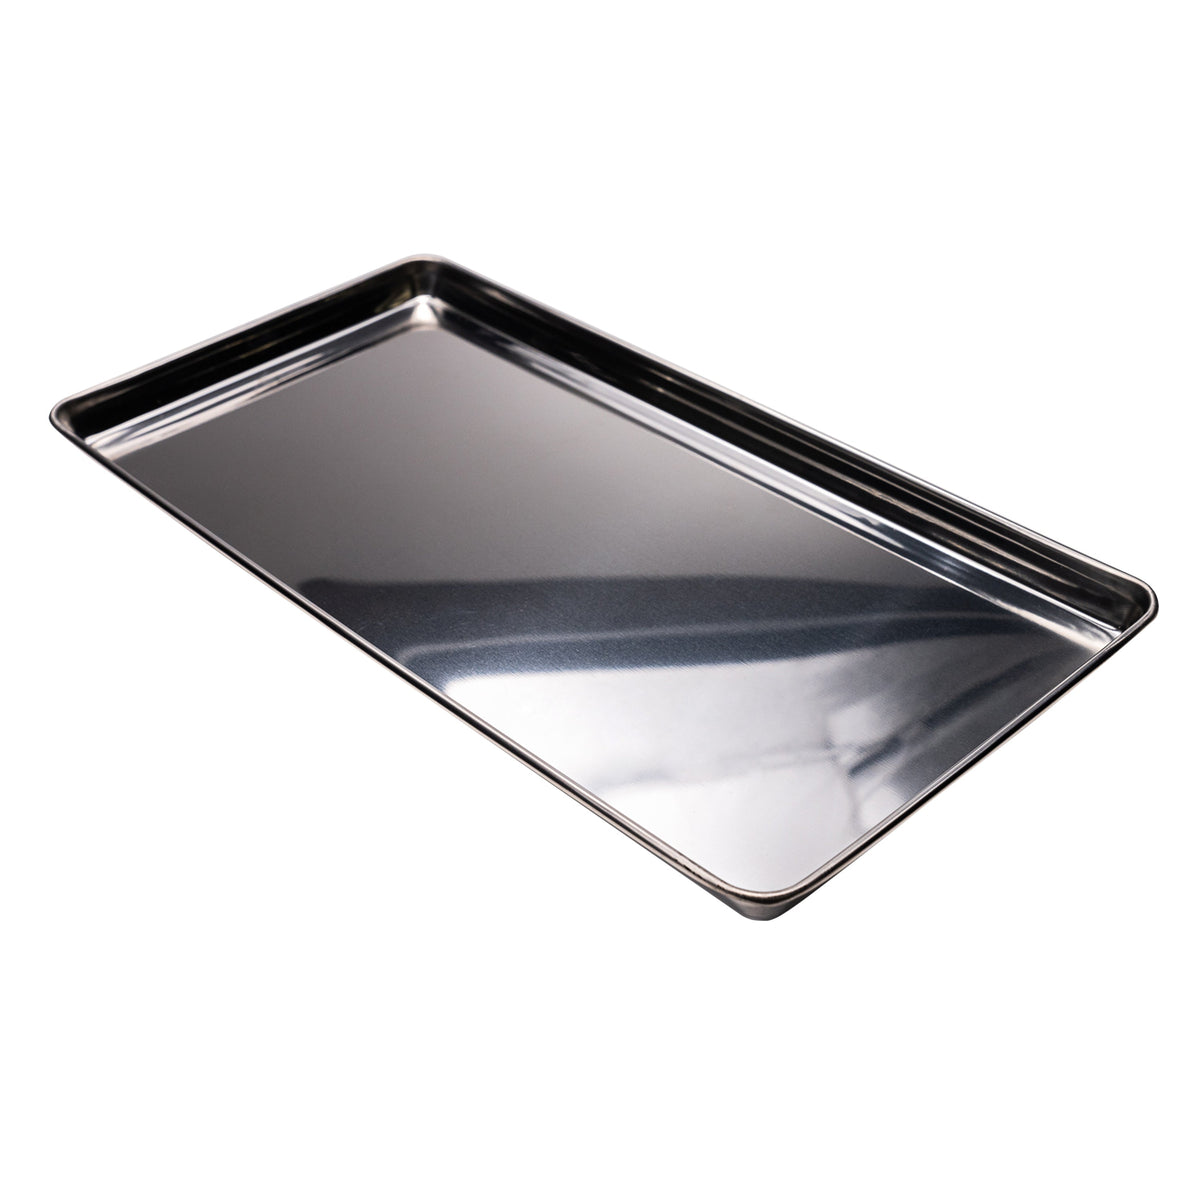 TATSoul Extension Arm + Stainless Steel Tray